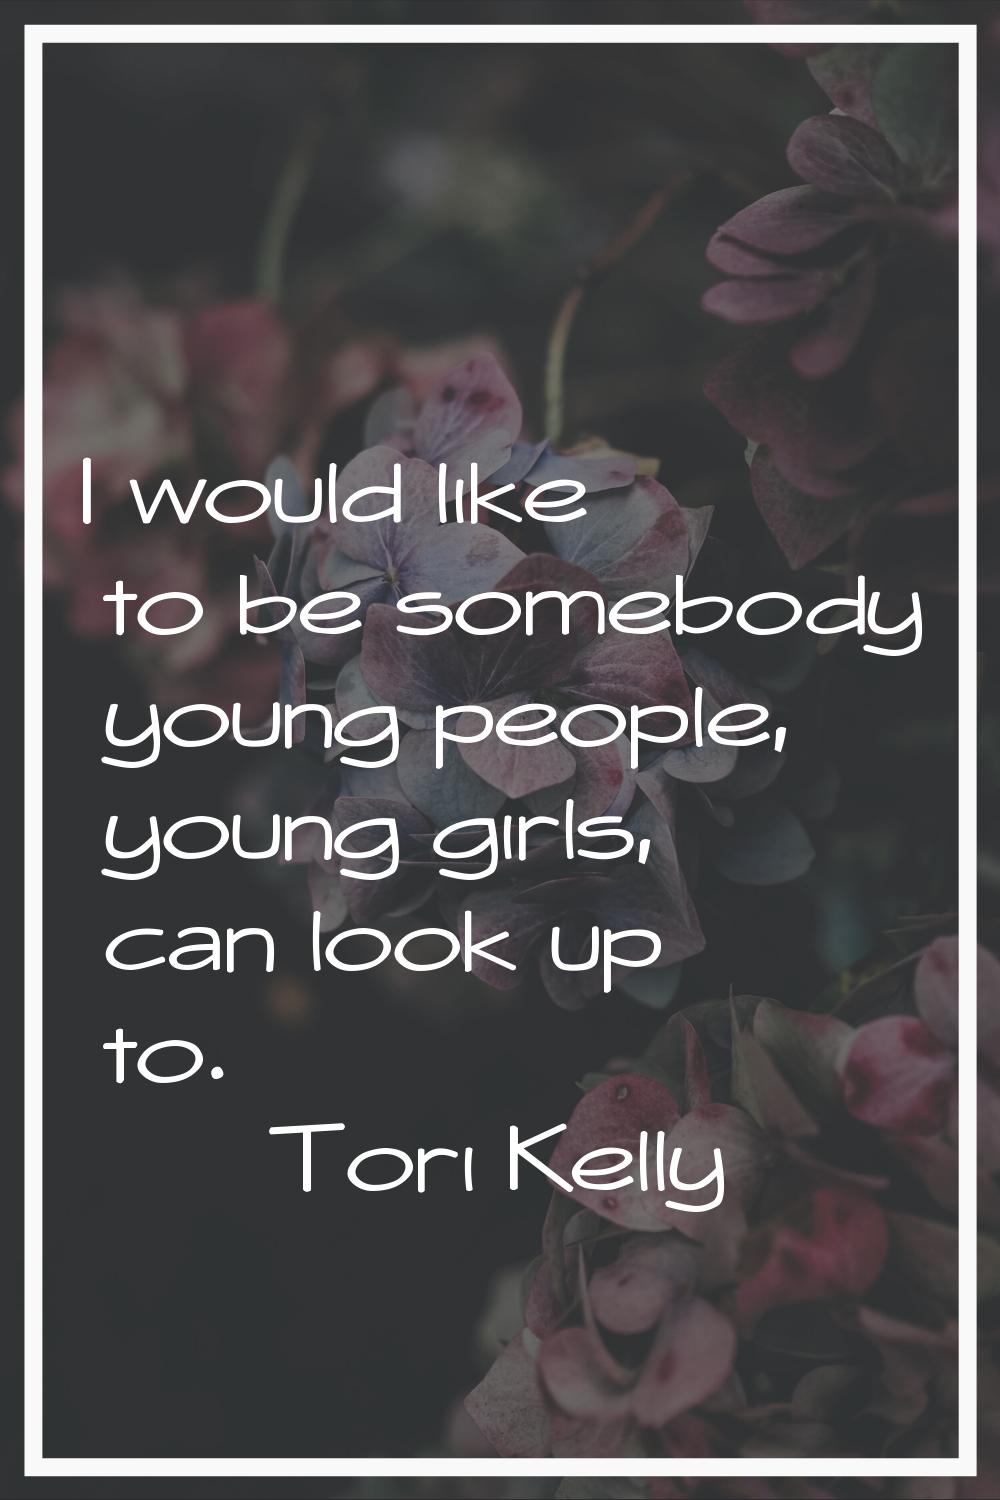 I would like to be somebody young people, young girls, can look up to.